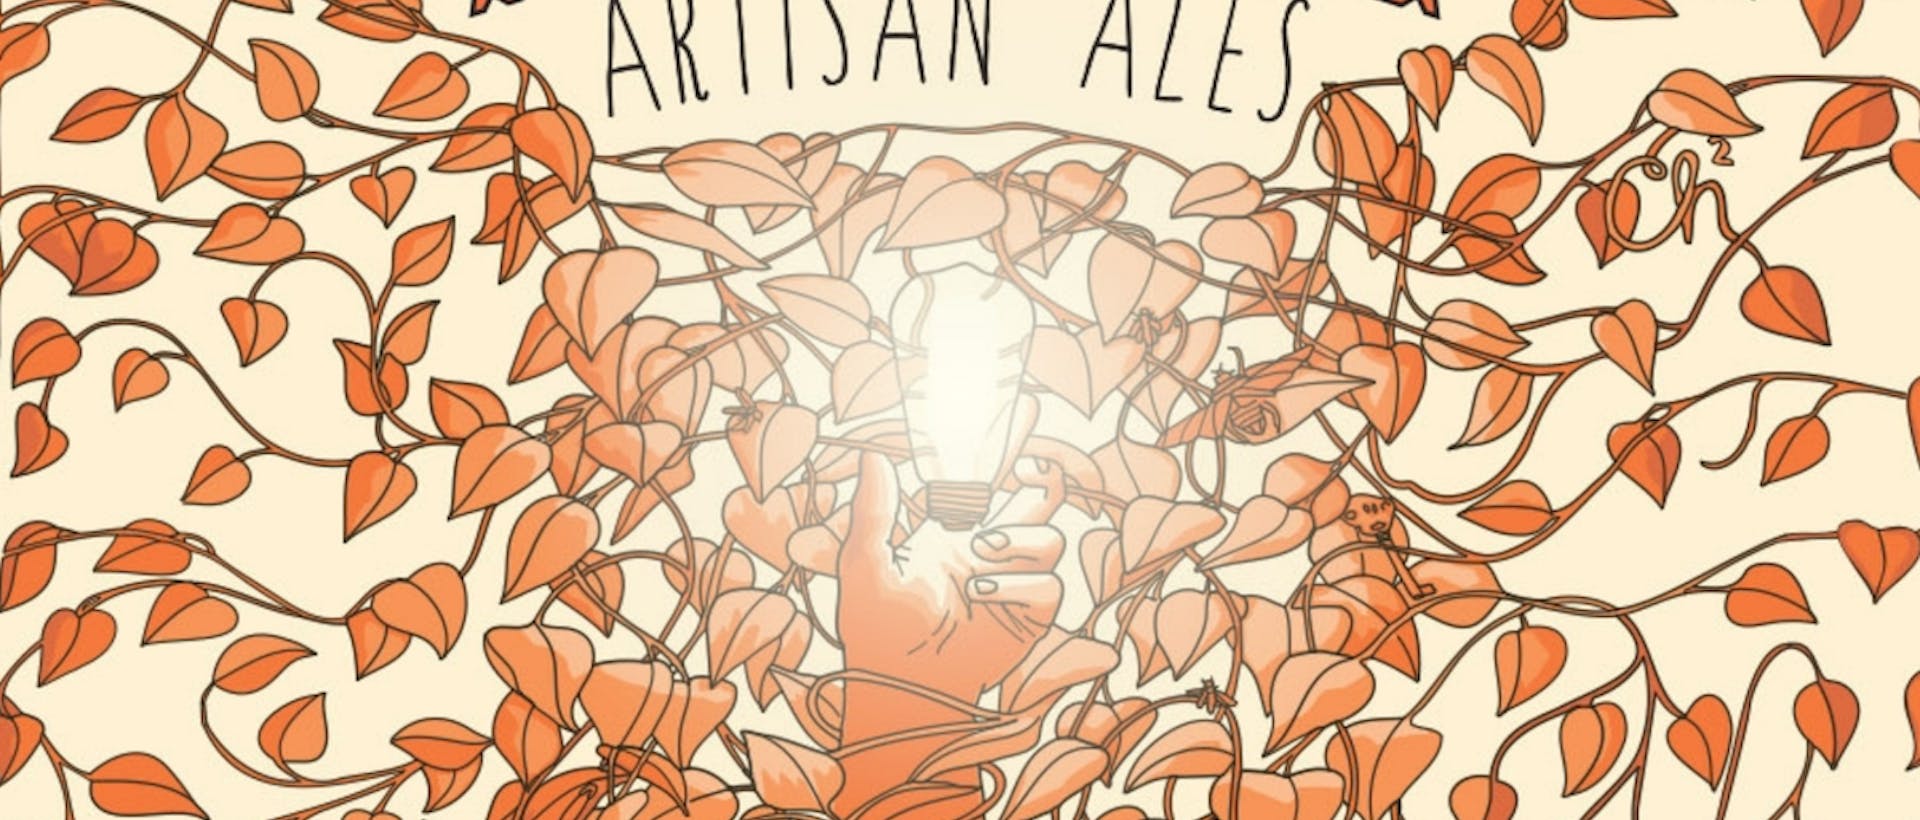 "Prairie Artisan Ales - Prairie Ale, A Belgian-Style Saison Ale" beer label, with drawing of a hand holding a light bulb wrapped in vines